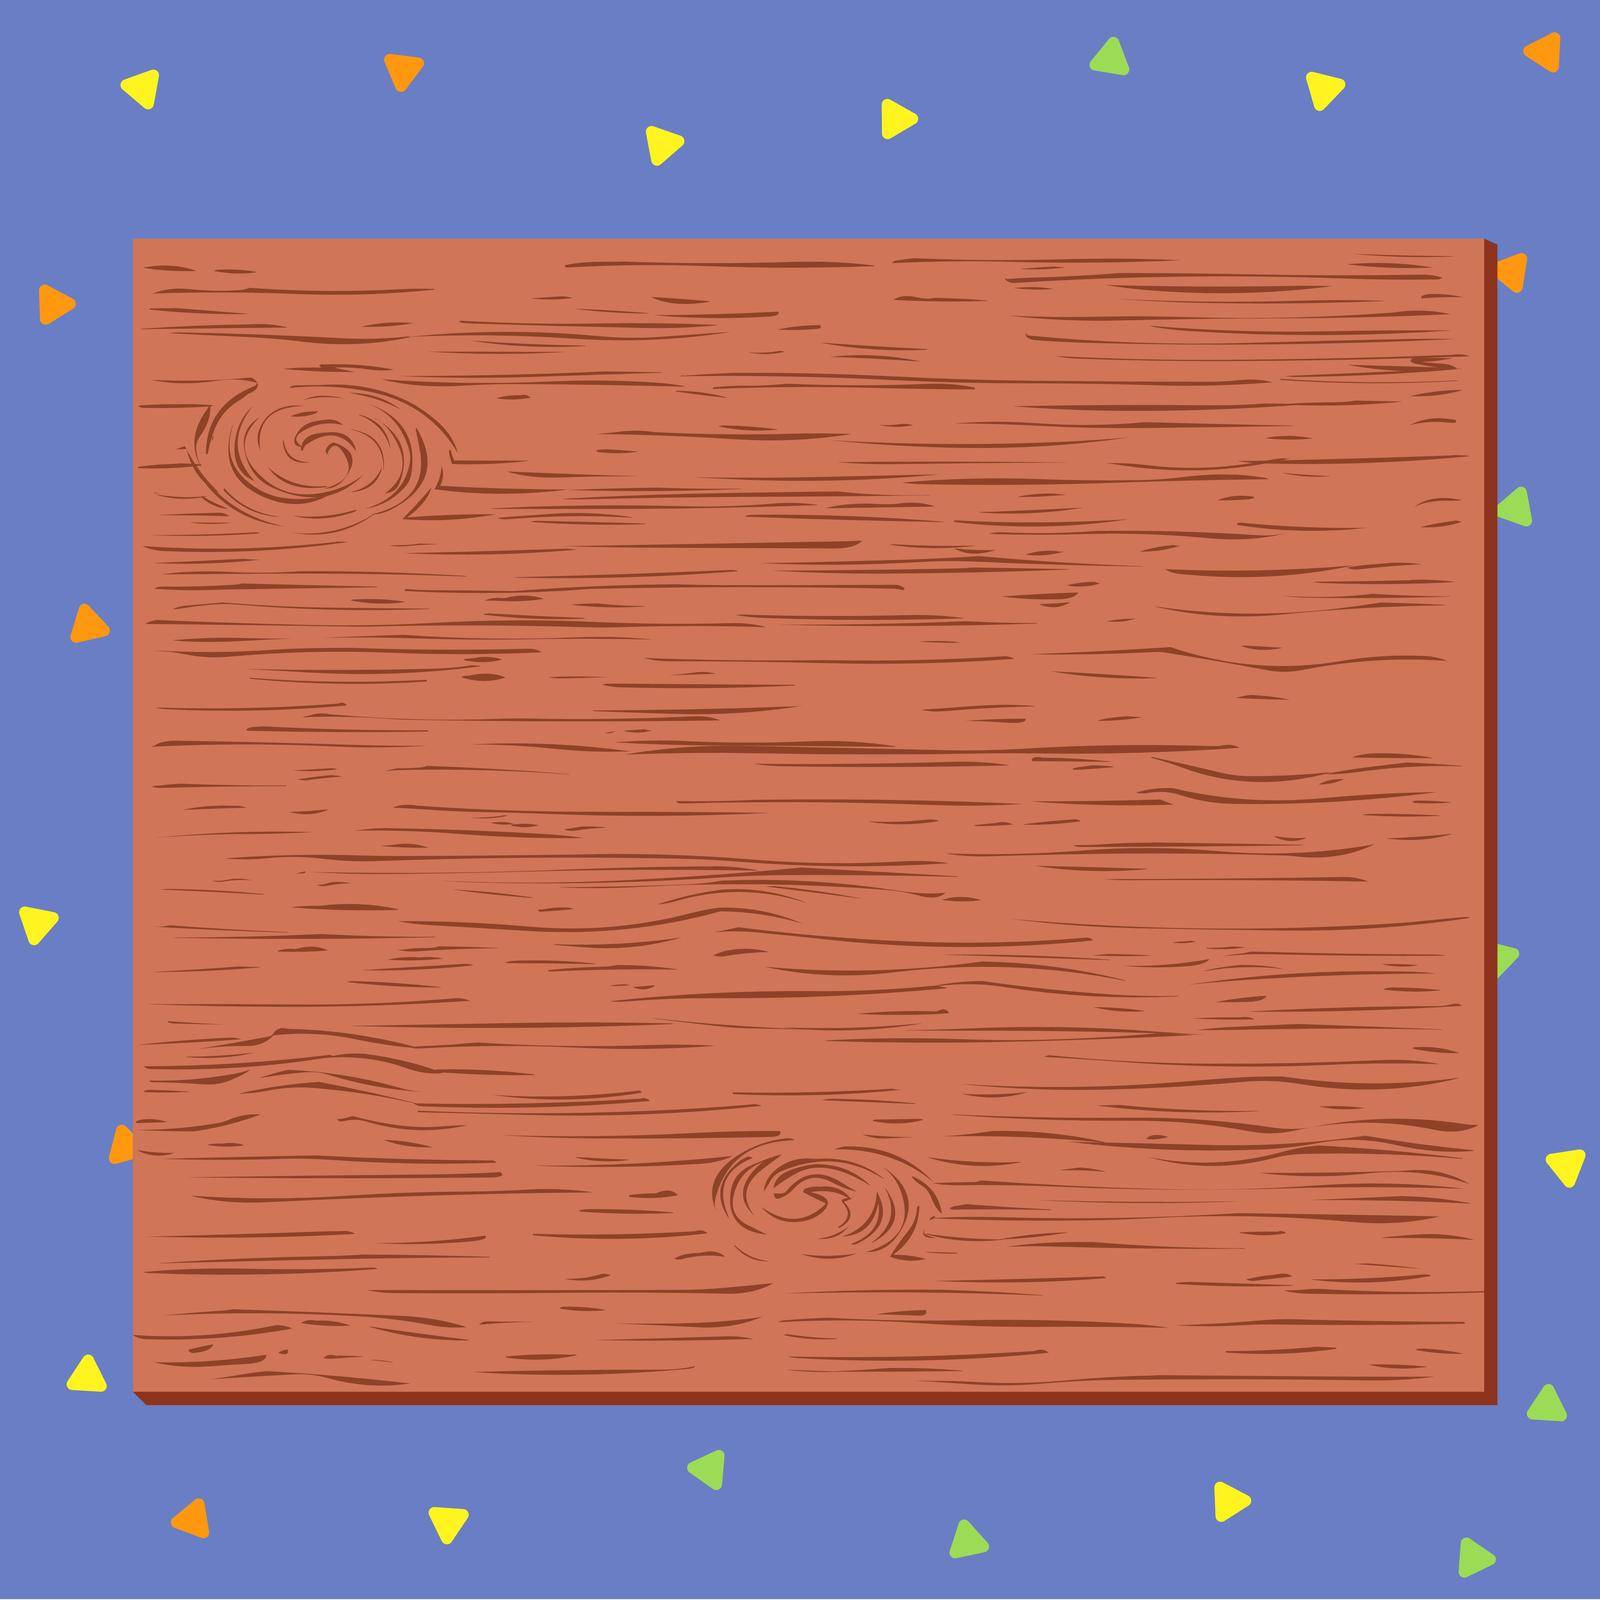 Square cartoon unreal rectangle wood nailed stuck on the wall. Unsymmetrical uneven pattern outline multicoloured design. Illustration of illustrated picture painting by nialowwa